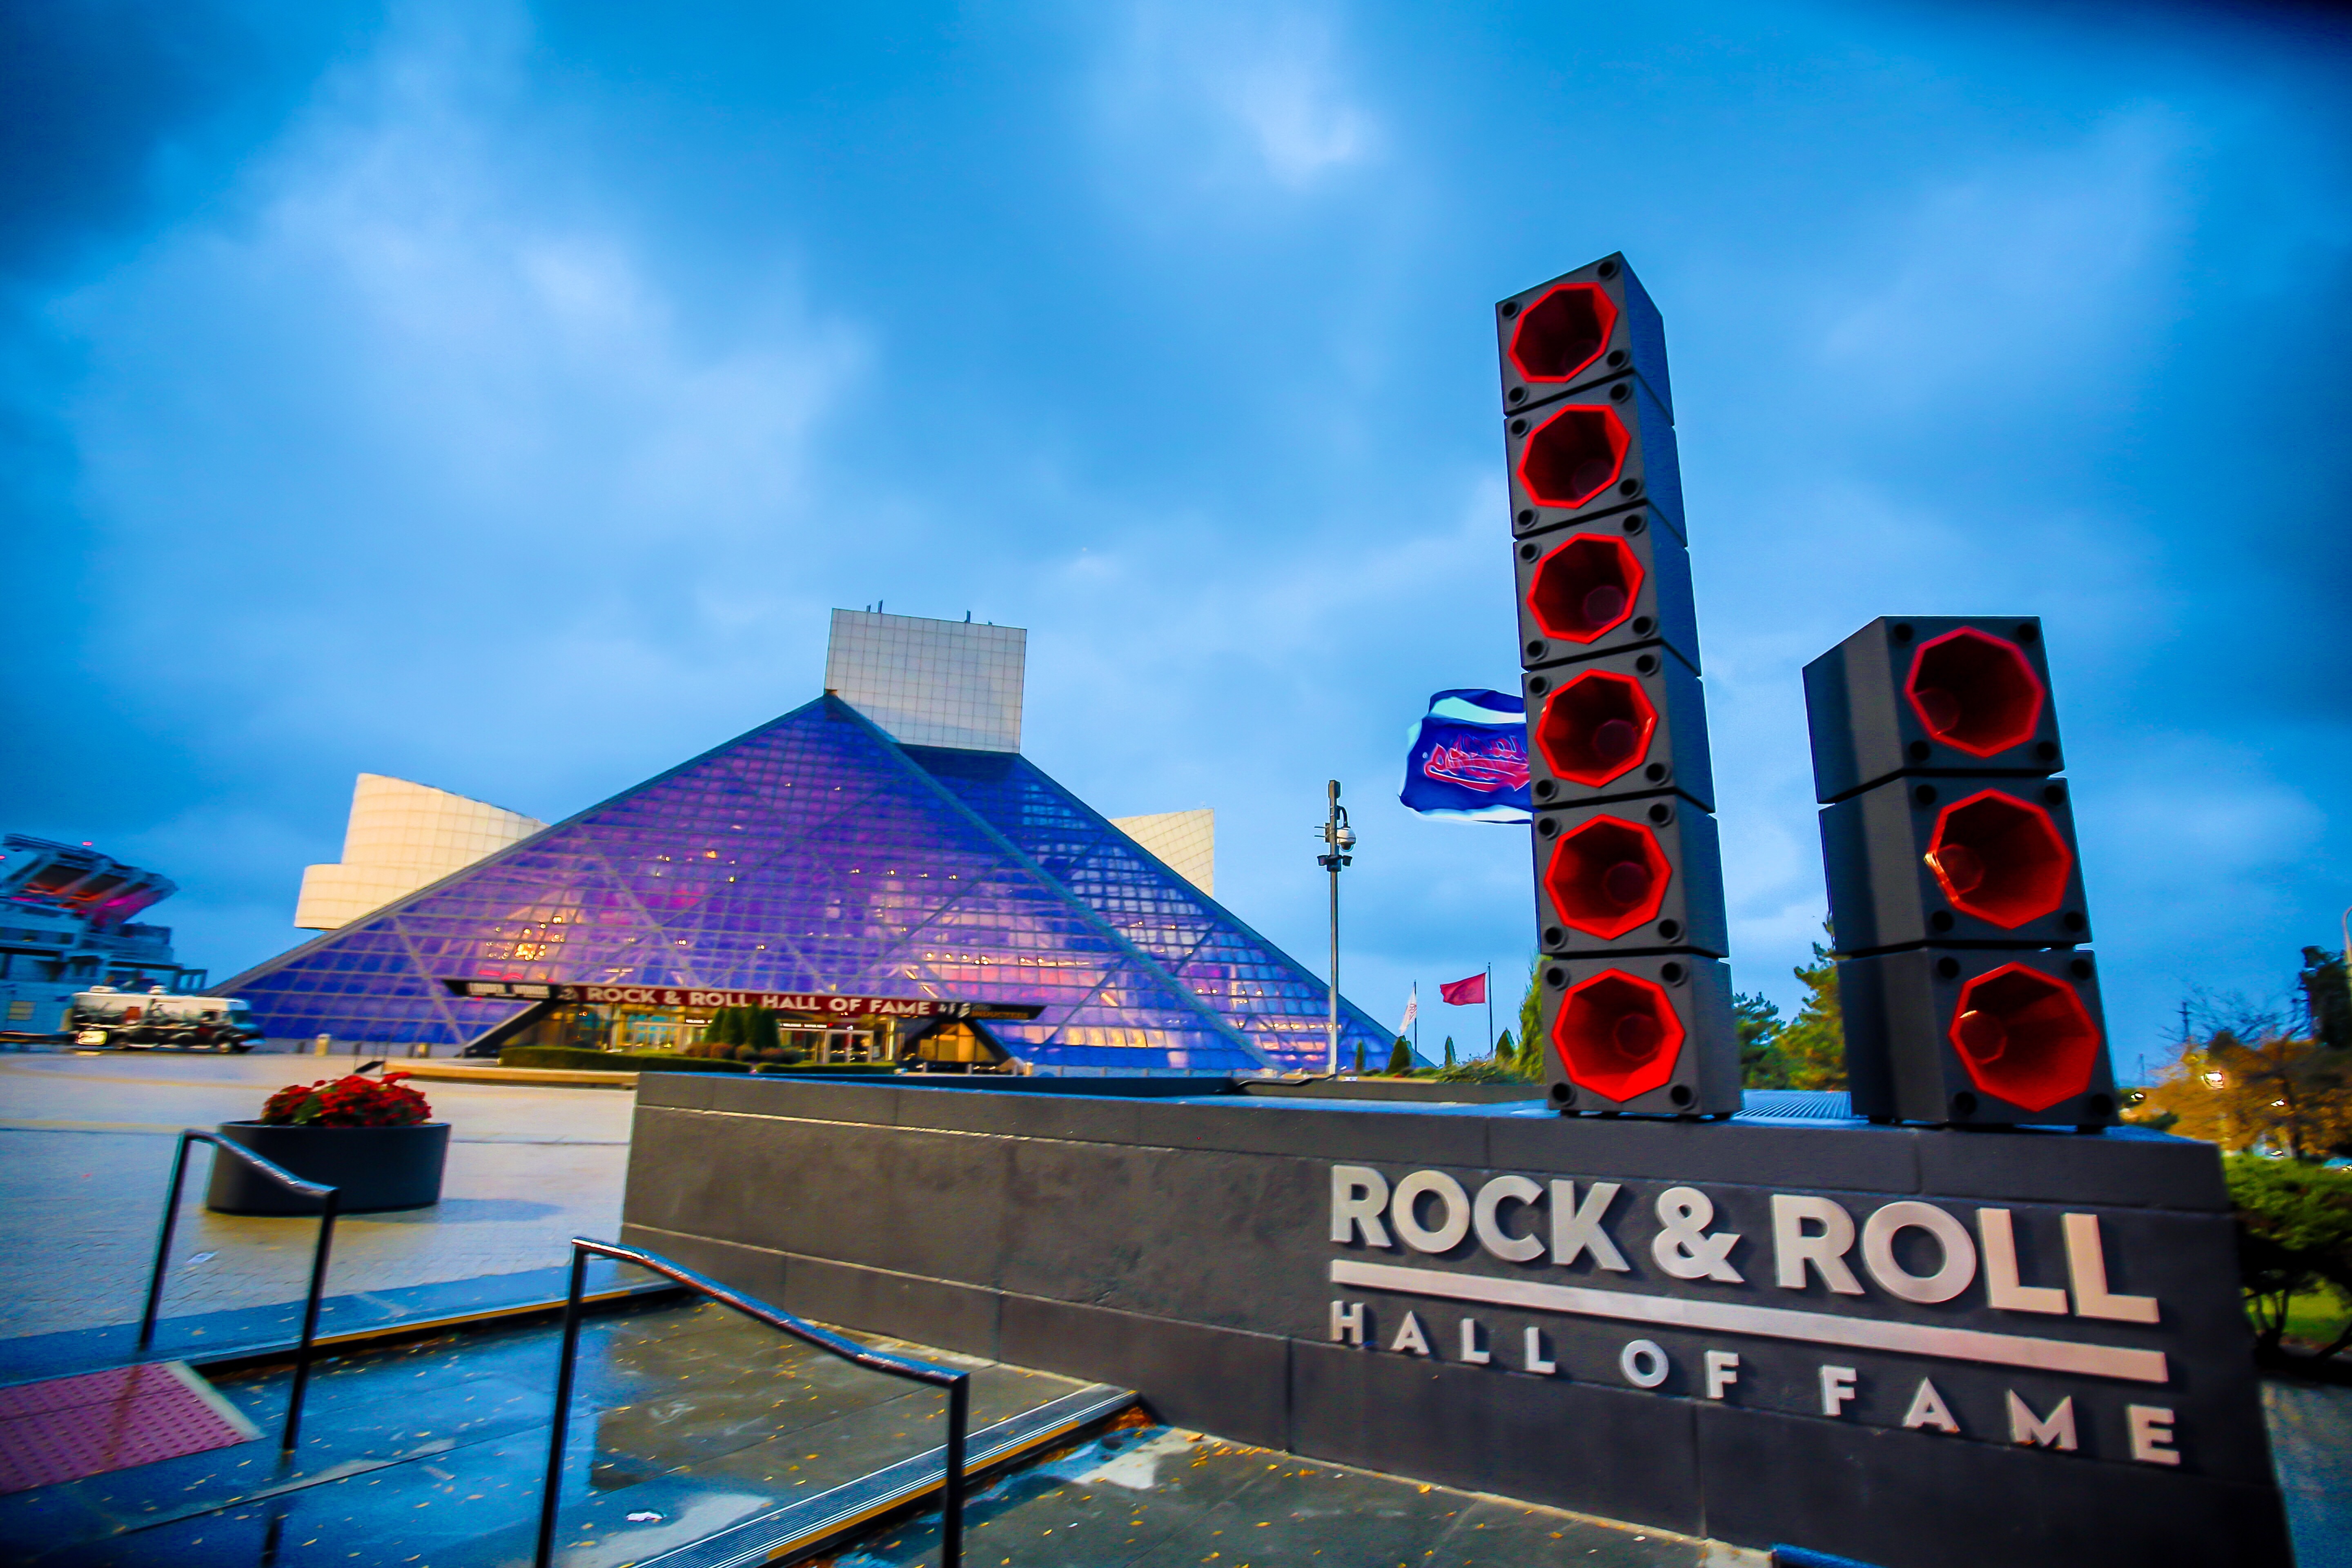 Rock & Roll Hall of Fame Downtown Cleveland Jay Kossman Photography